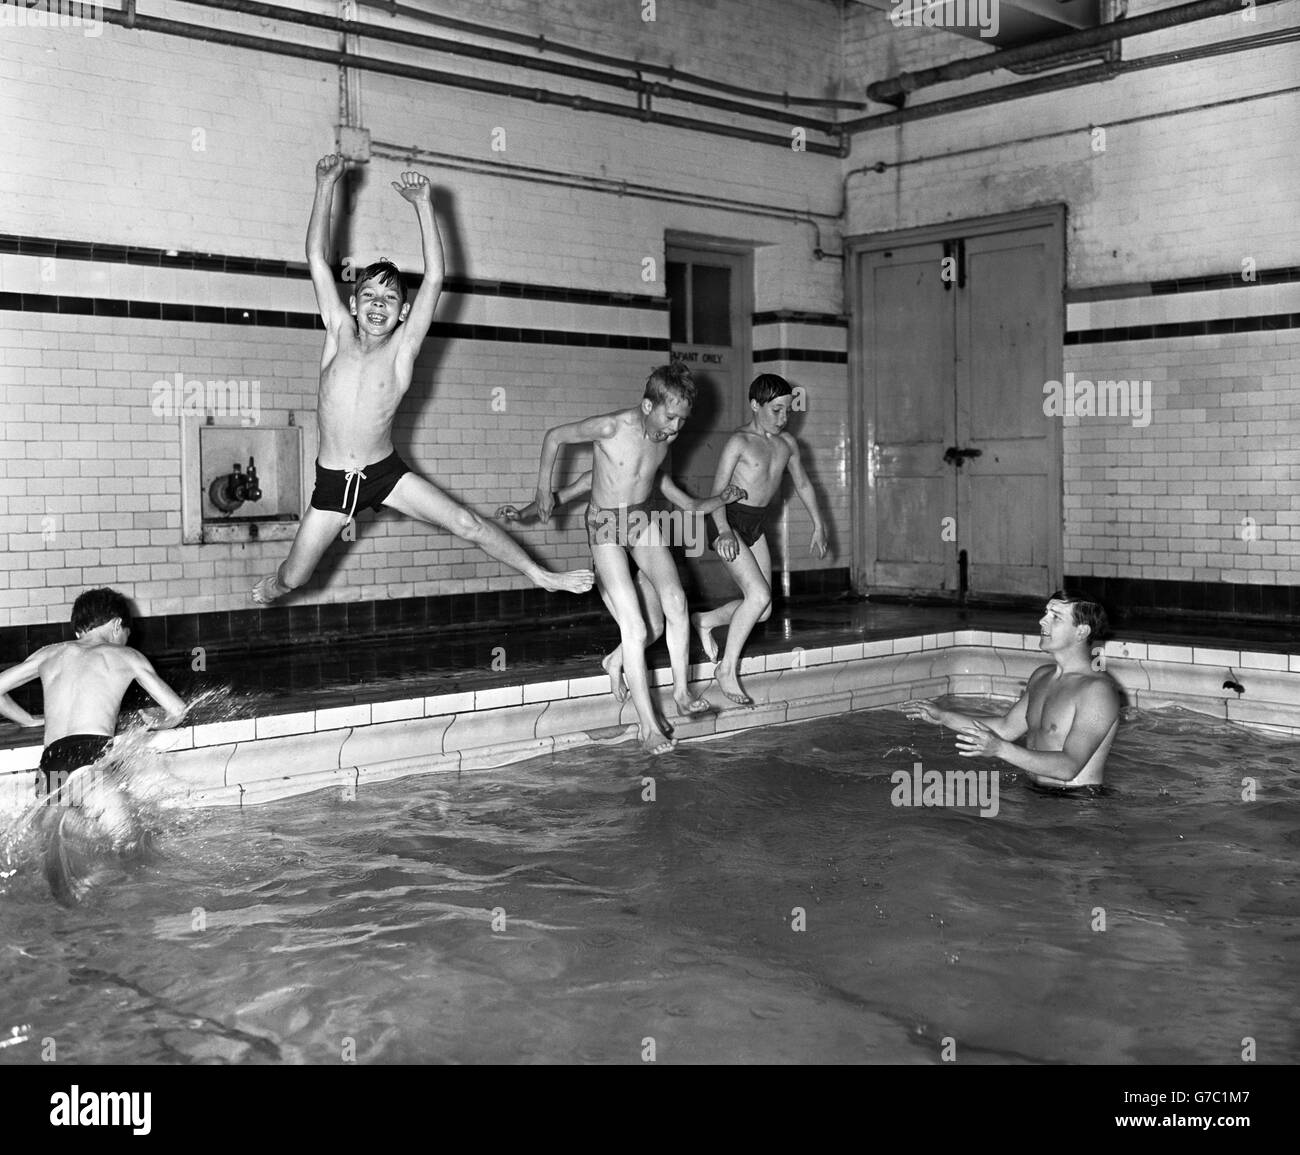 Nuoto - Gioventù Nuoto classe a Y.M.C.A - Russell Street, Londra Foto Stock